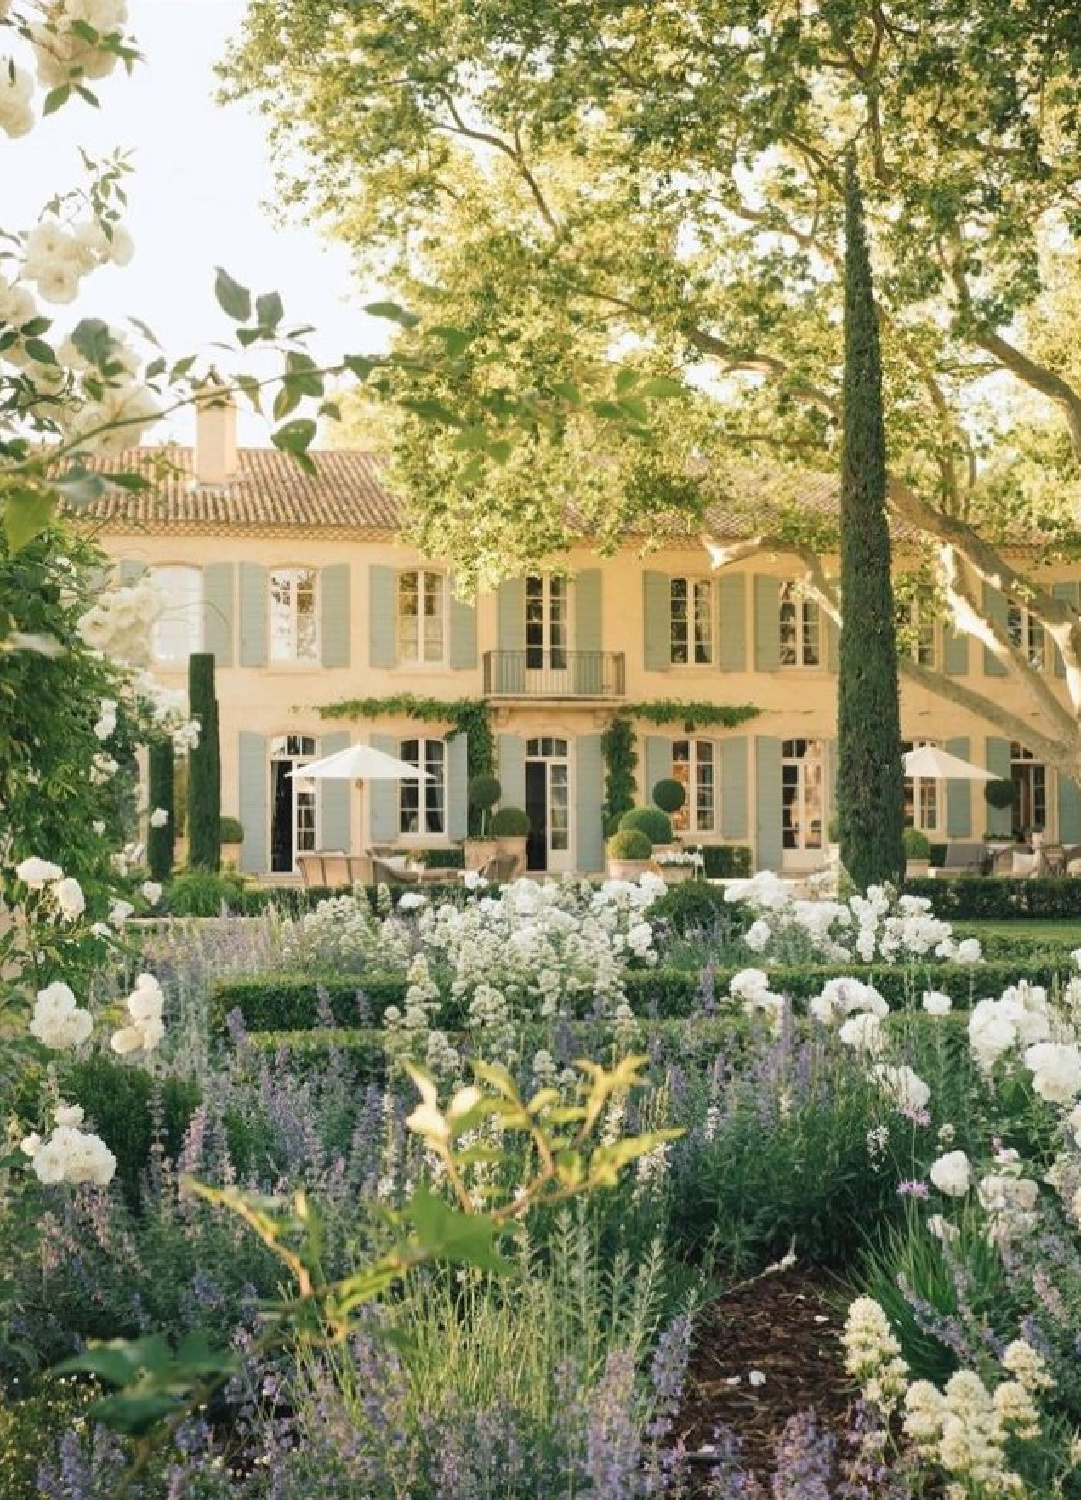 @jamiebeck.co - stunning capture of Provence Poiriers (a French chateau in Provence) with dreamy gardens and soft colors. #provencepoiriers #frenchchateau #southoffrance #provencestyle